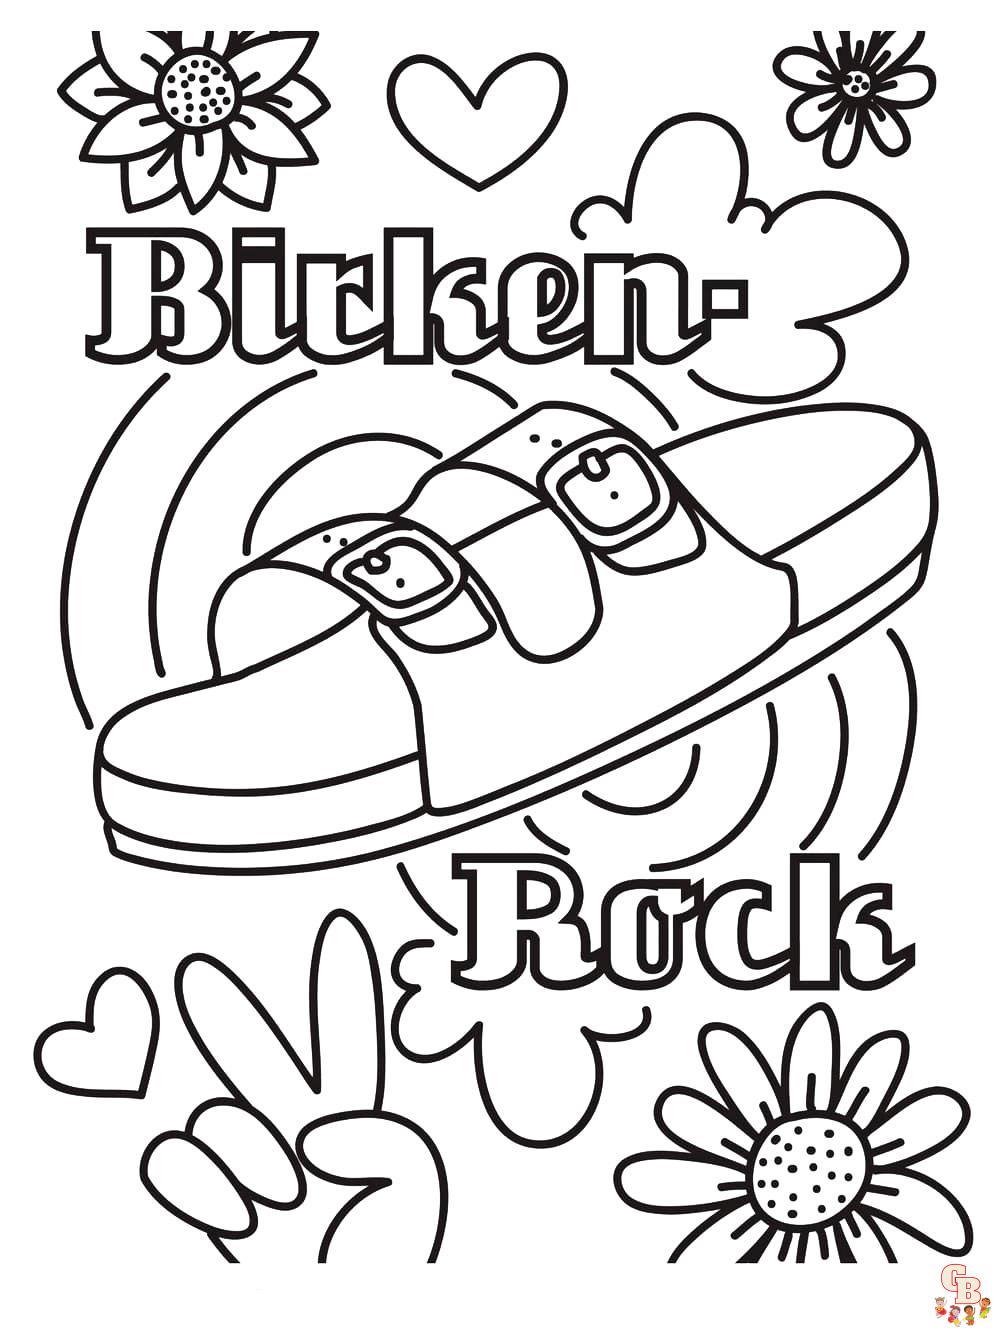 Aesthetic Coloring Pages - Get Free Printable Sheets at GBcoloring